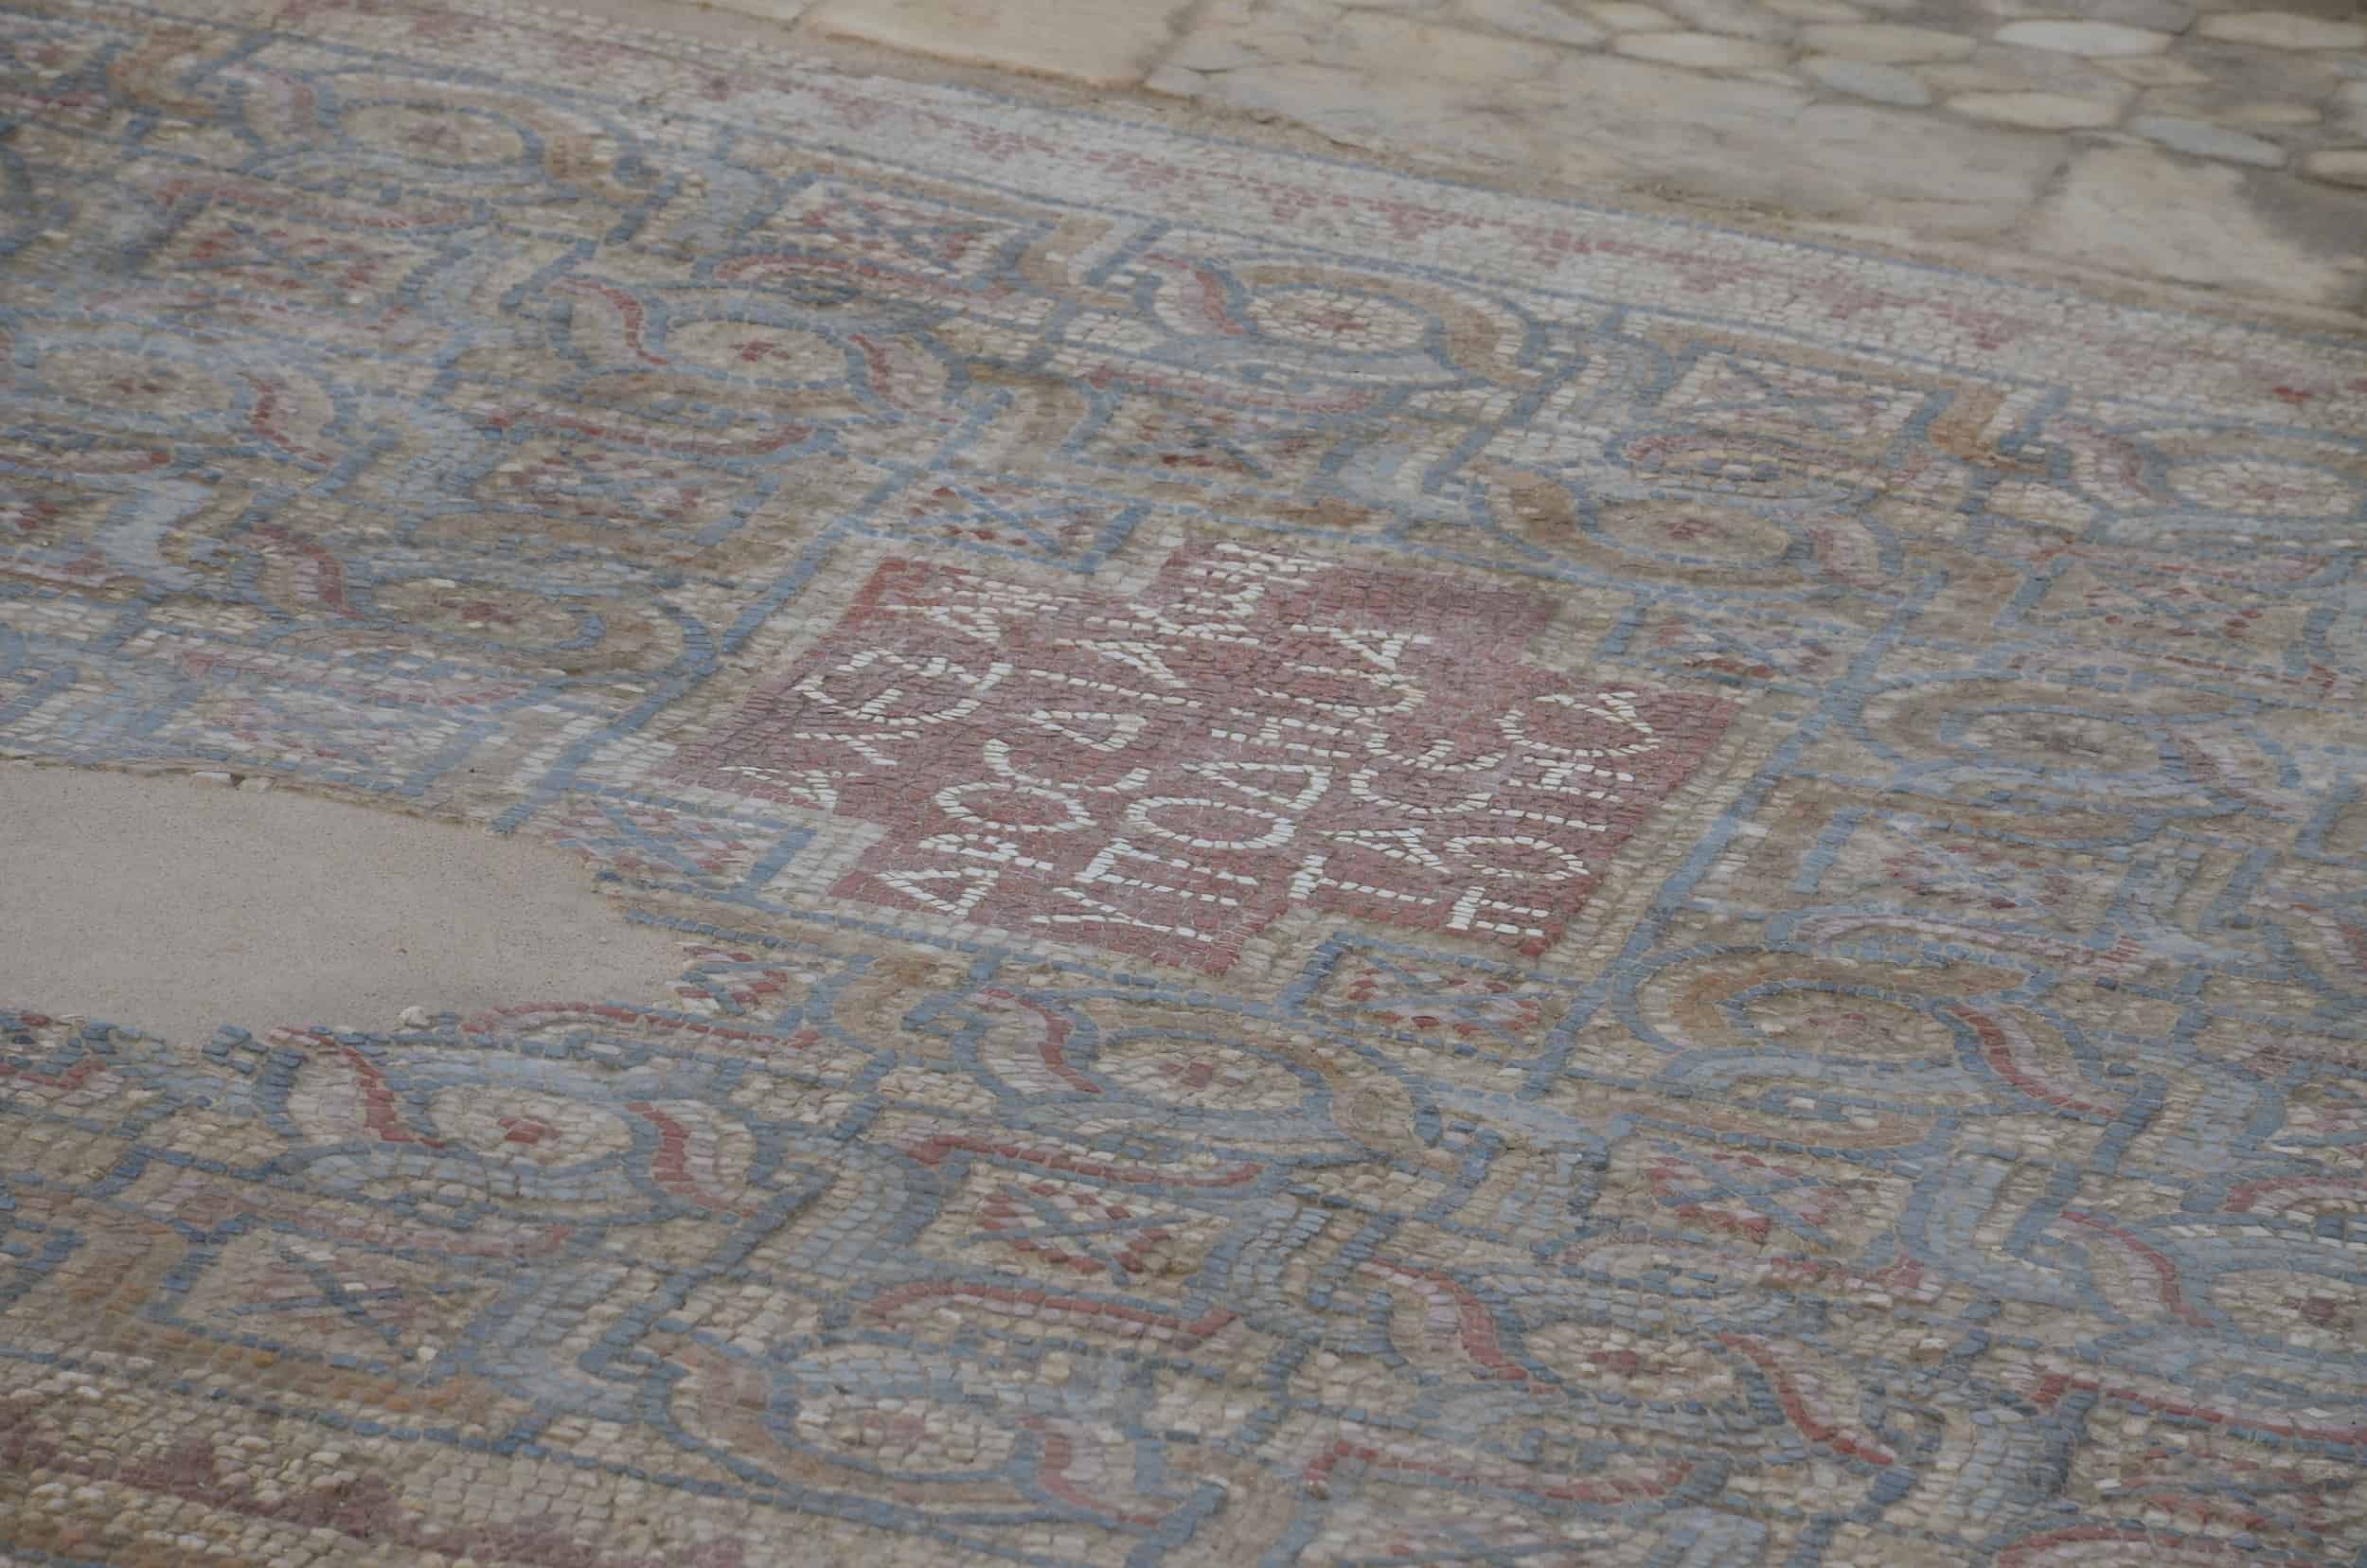 "Alexander deacon made the strip" in the south aisle at the Church of Laodicea